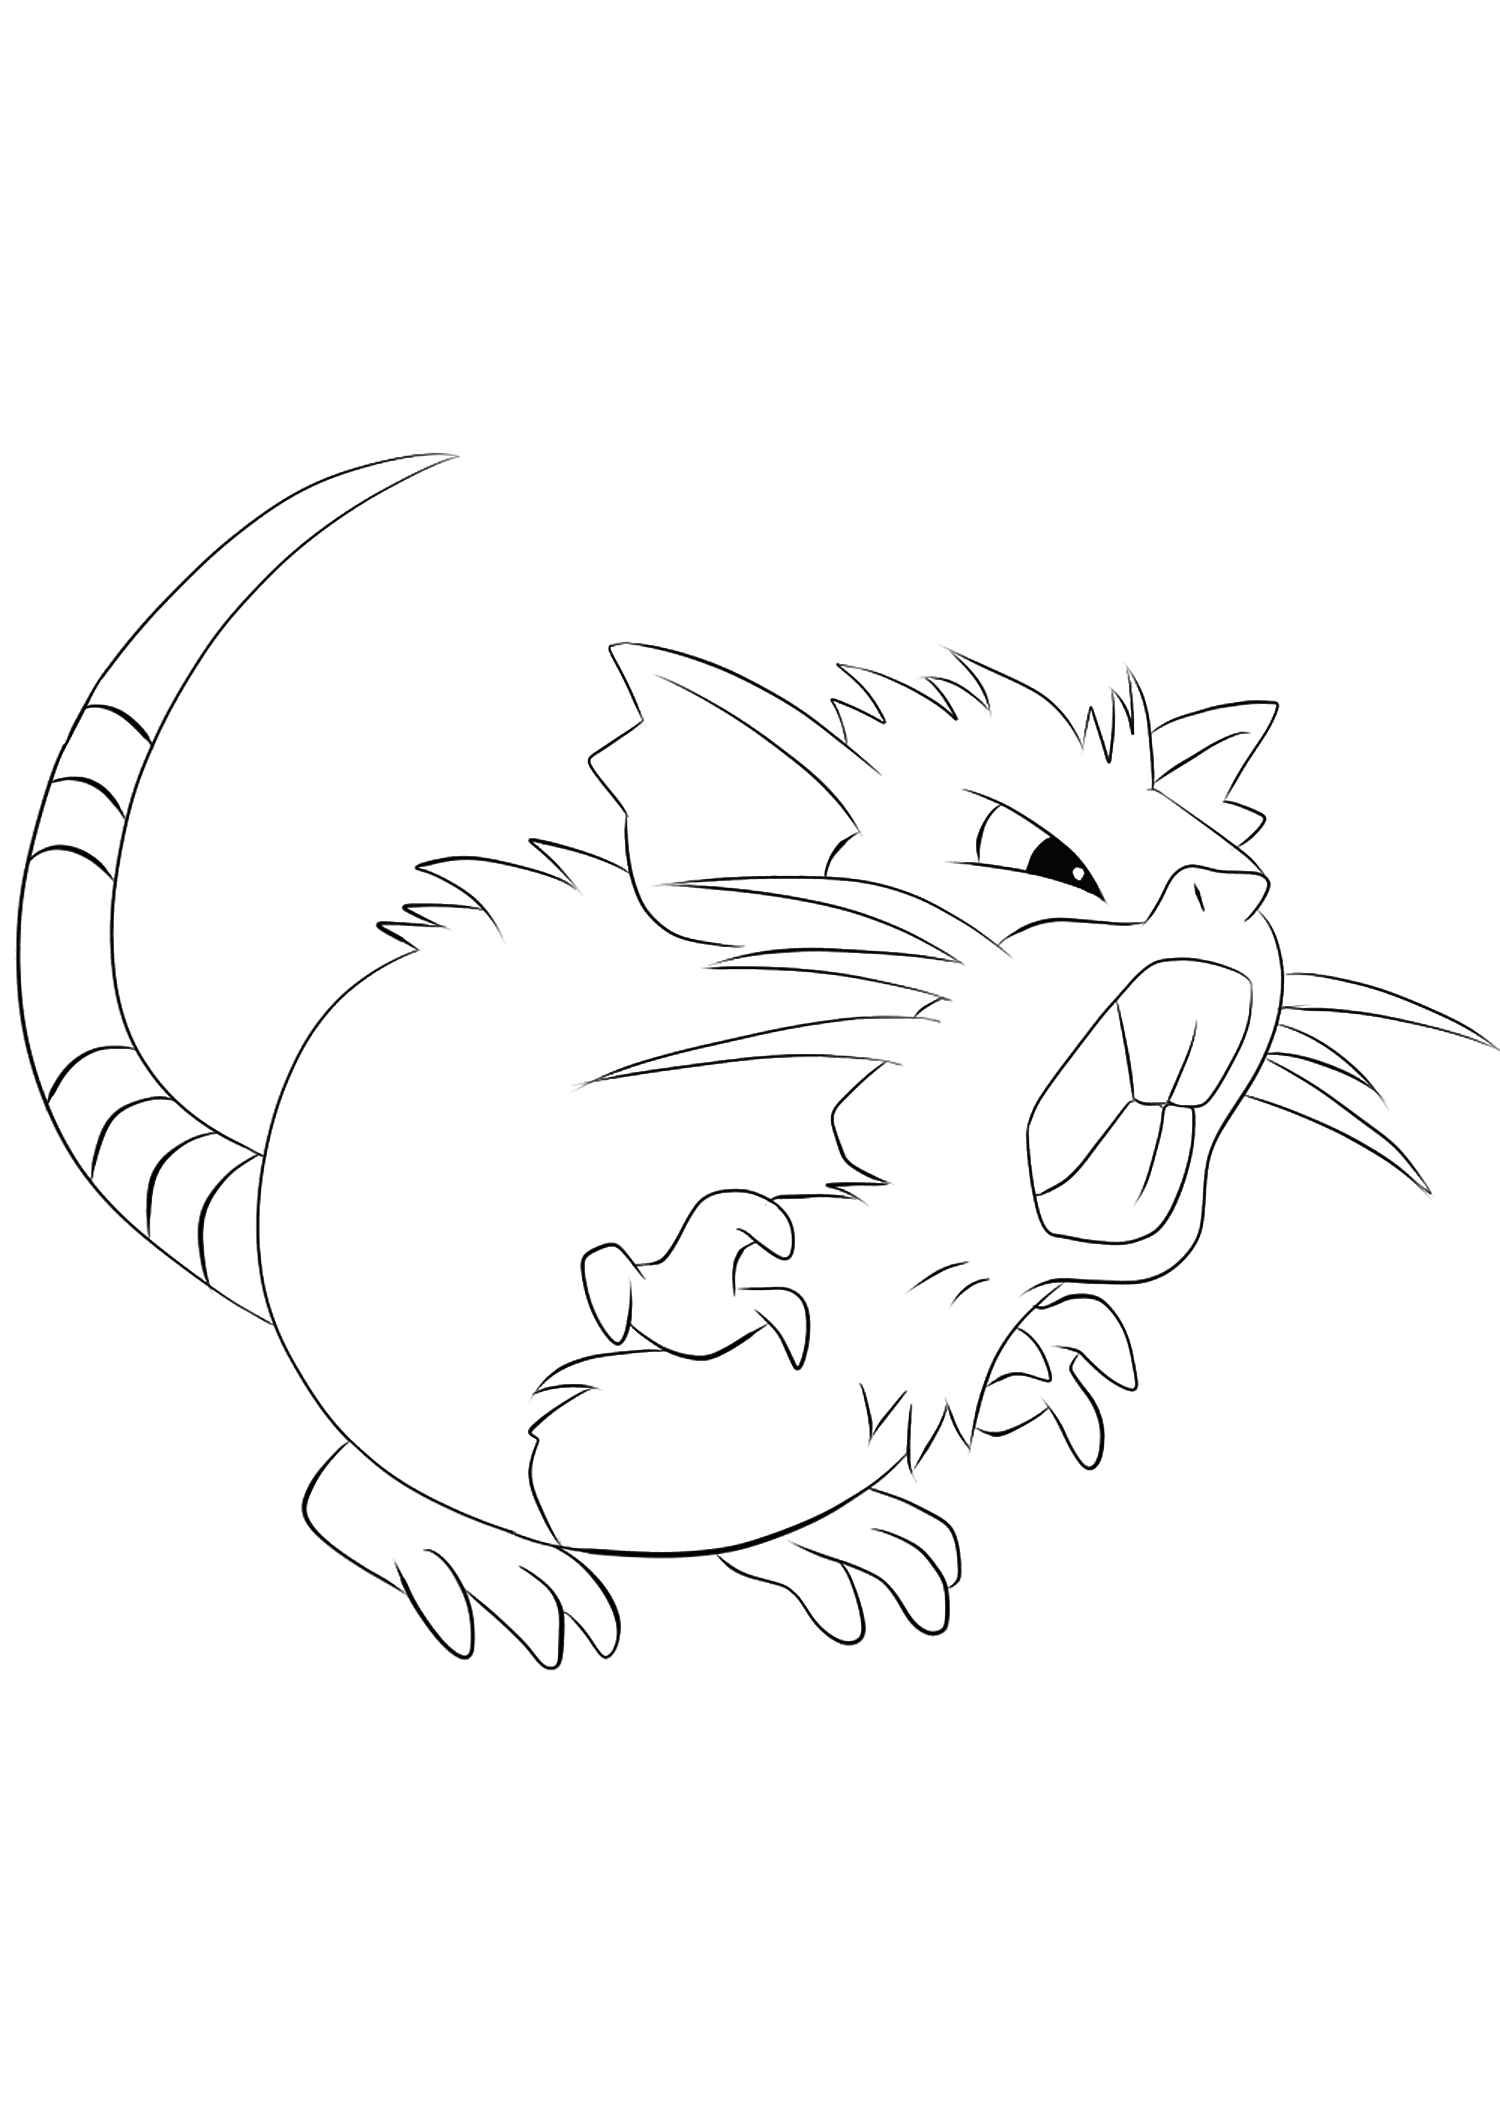 Raticate No.20  Pokemon Generation I   All Pokemon coloring pages ...